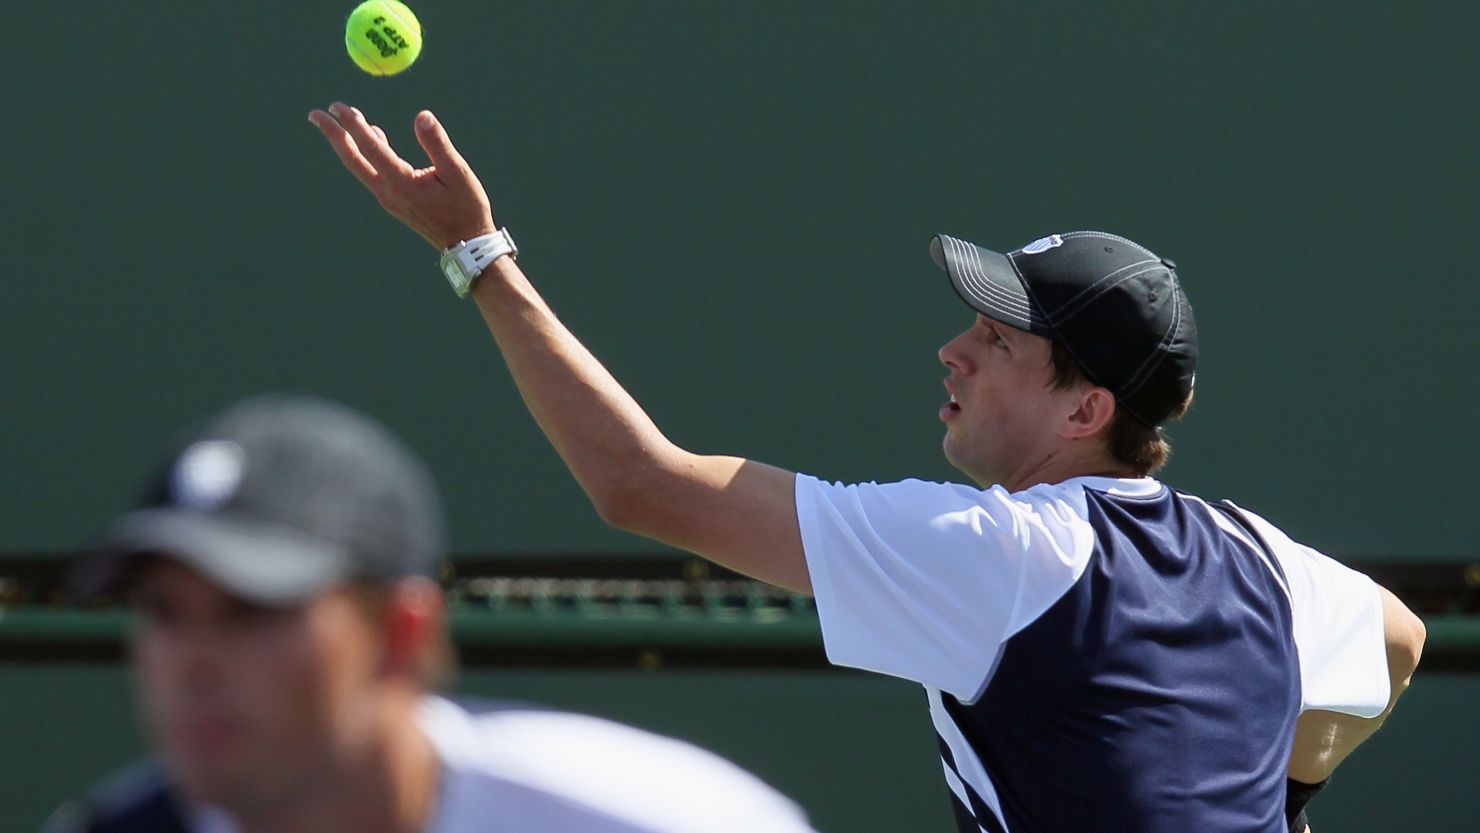 Bob and Mike Bryan made light work of their Davis Cup doubles rubber against France's Michael Llodra and Julien Benneteau 